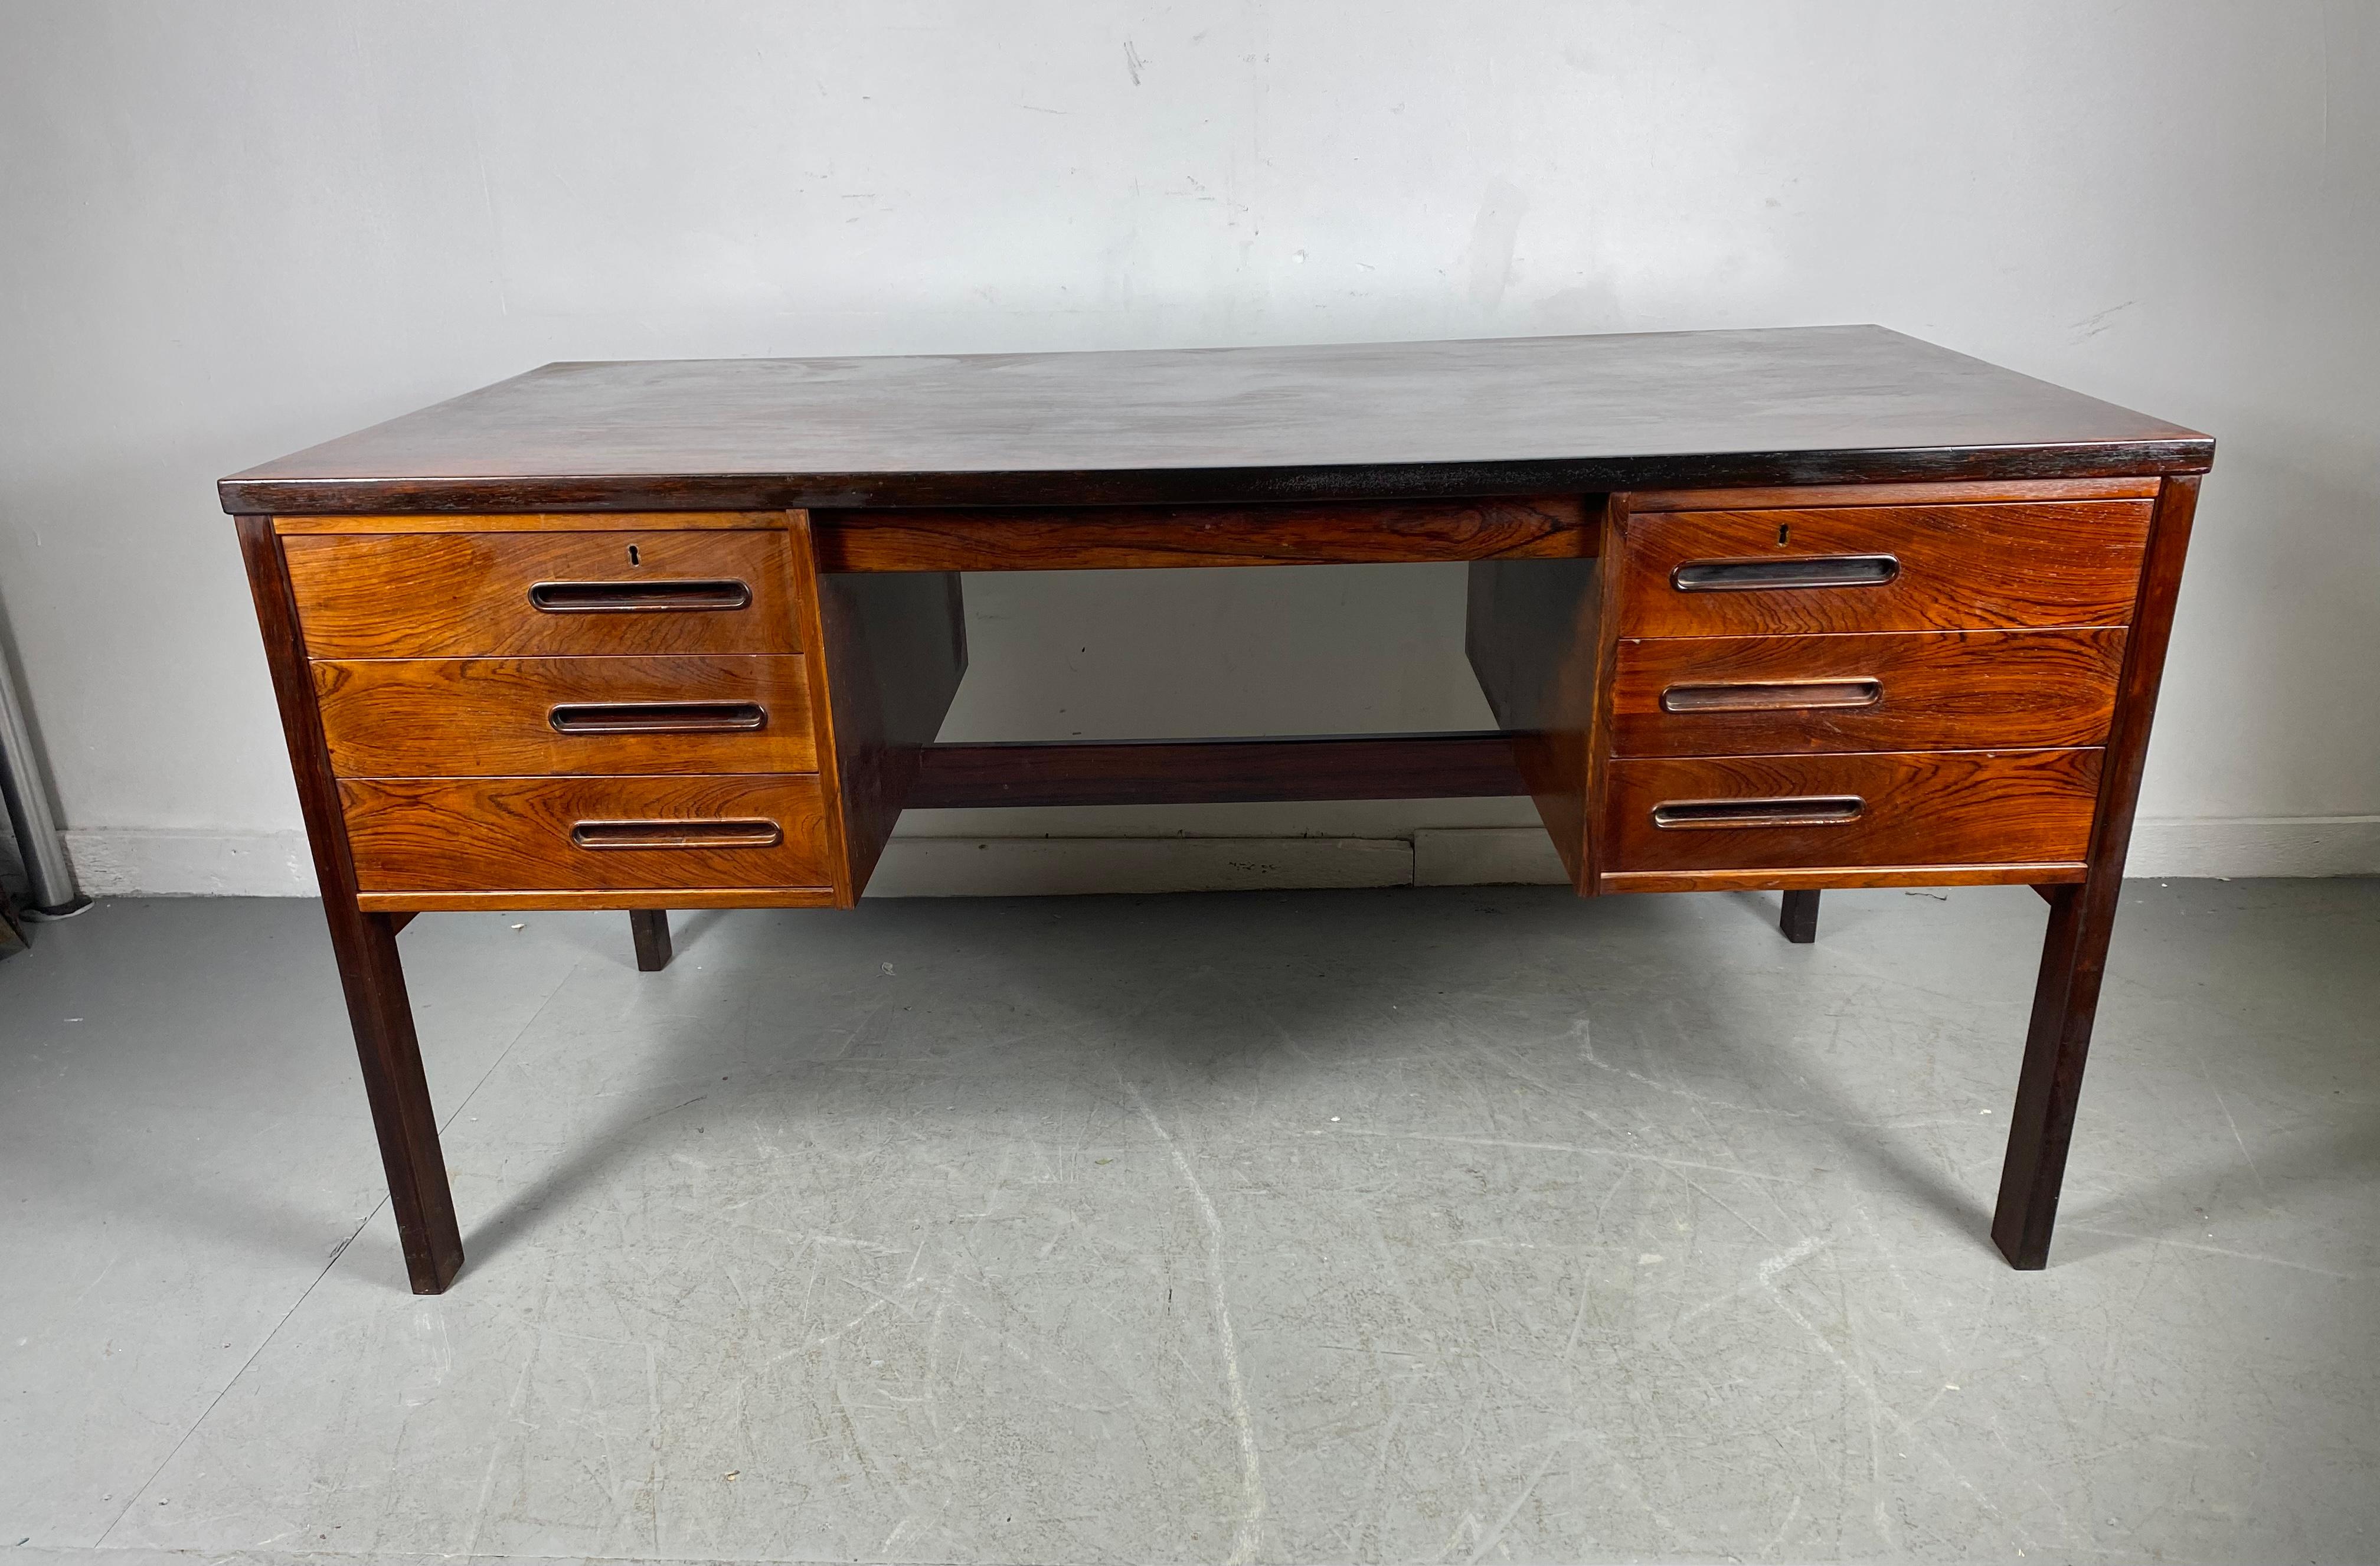 Richly grained Brazilian rosewood desk ,,made in Denmark attributed to Arne Vodder, Featuring 6 drawers,, two top locking.. dovetail joinery,, backside bookcase / cubbies.. Superior quality and construction..Hand delivery avail to New York City or